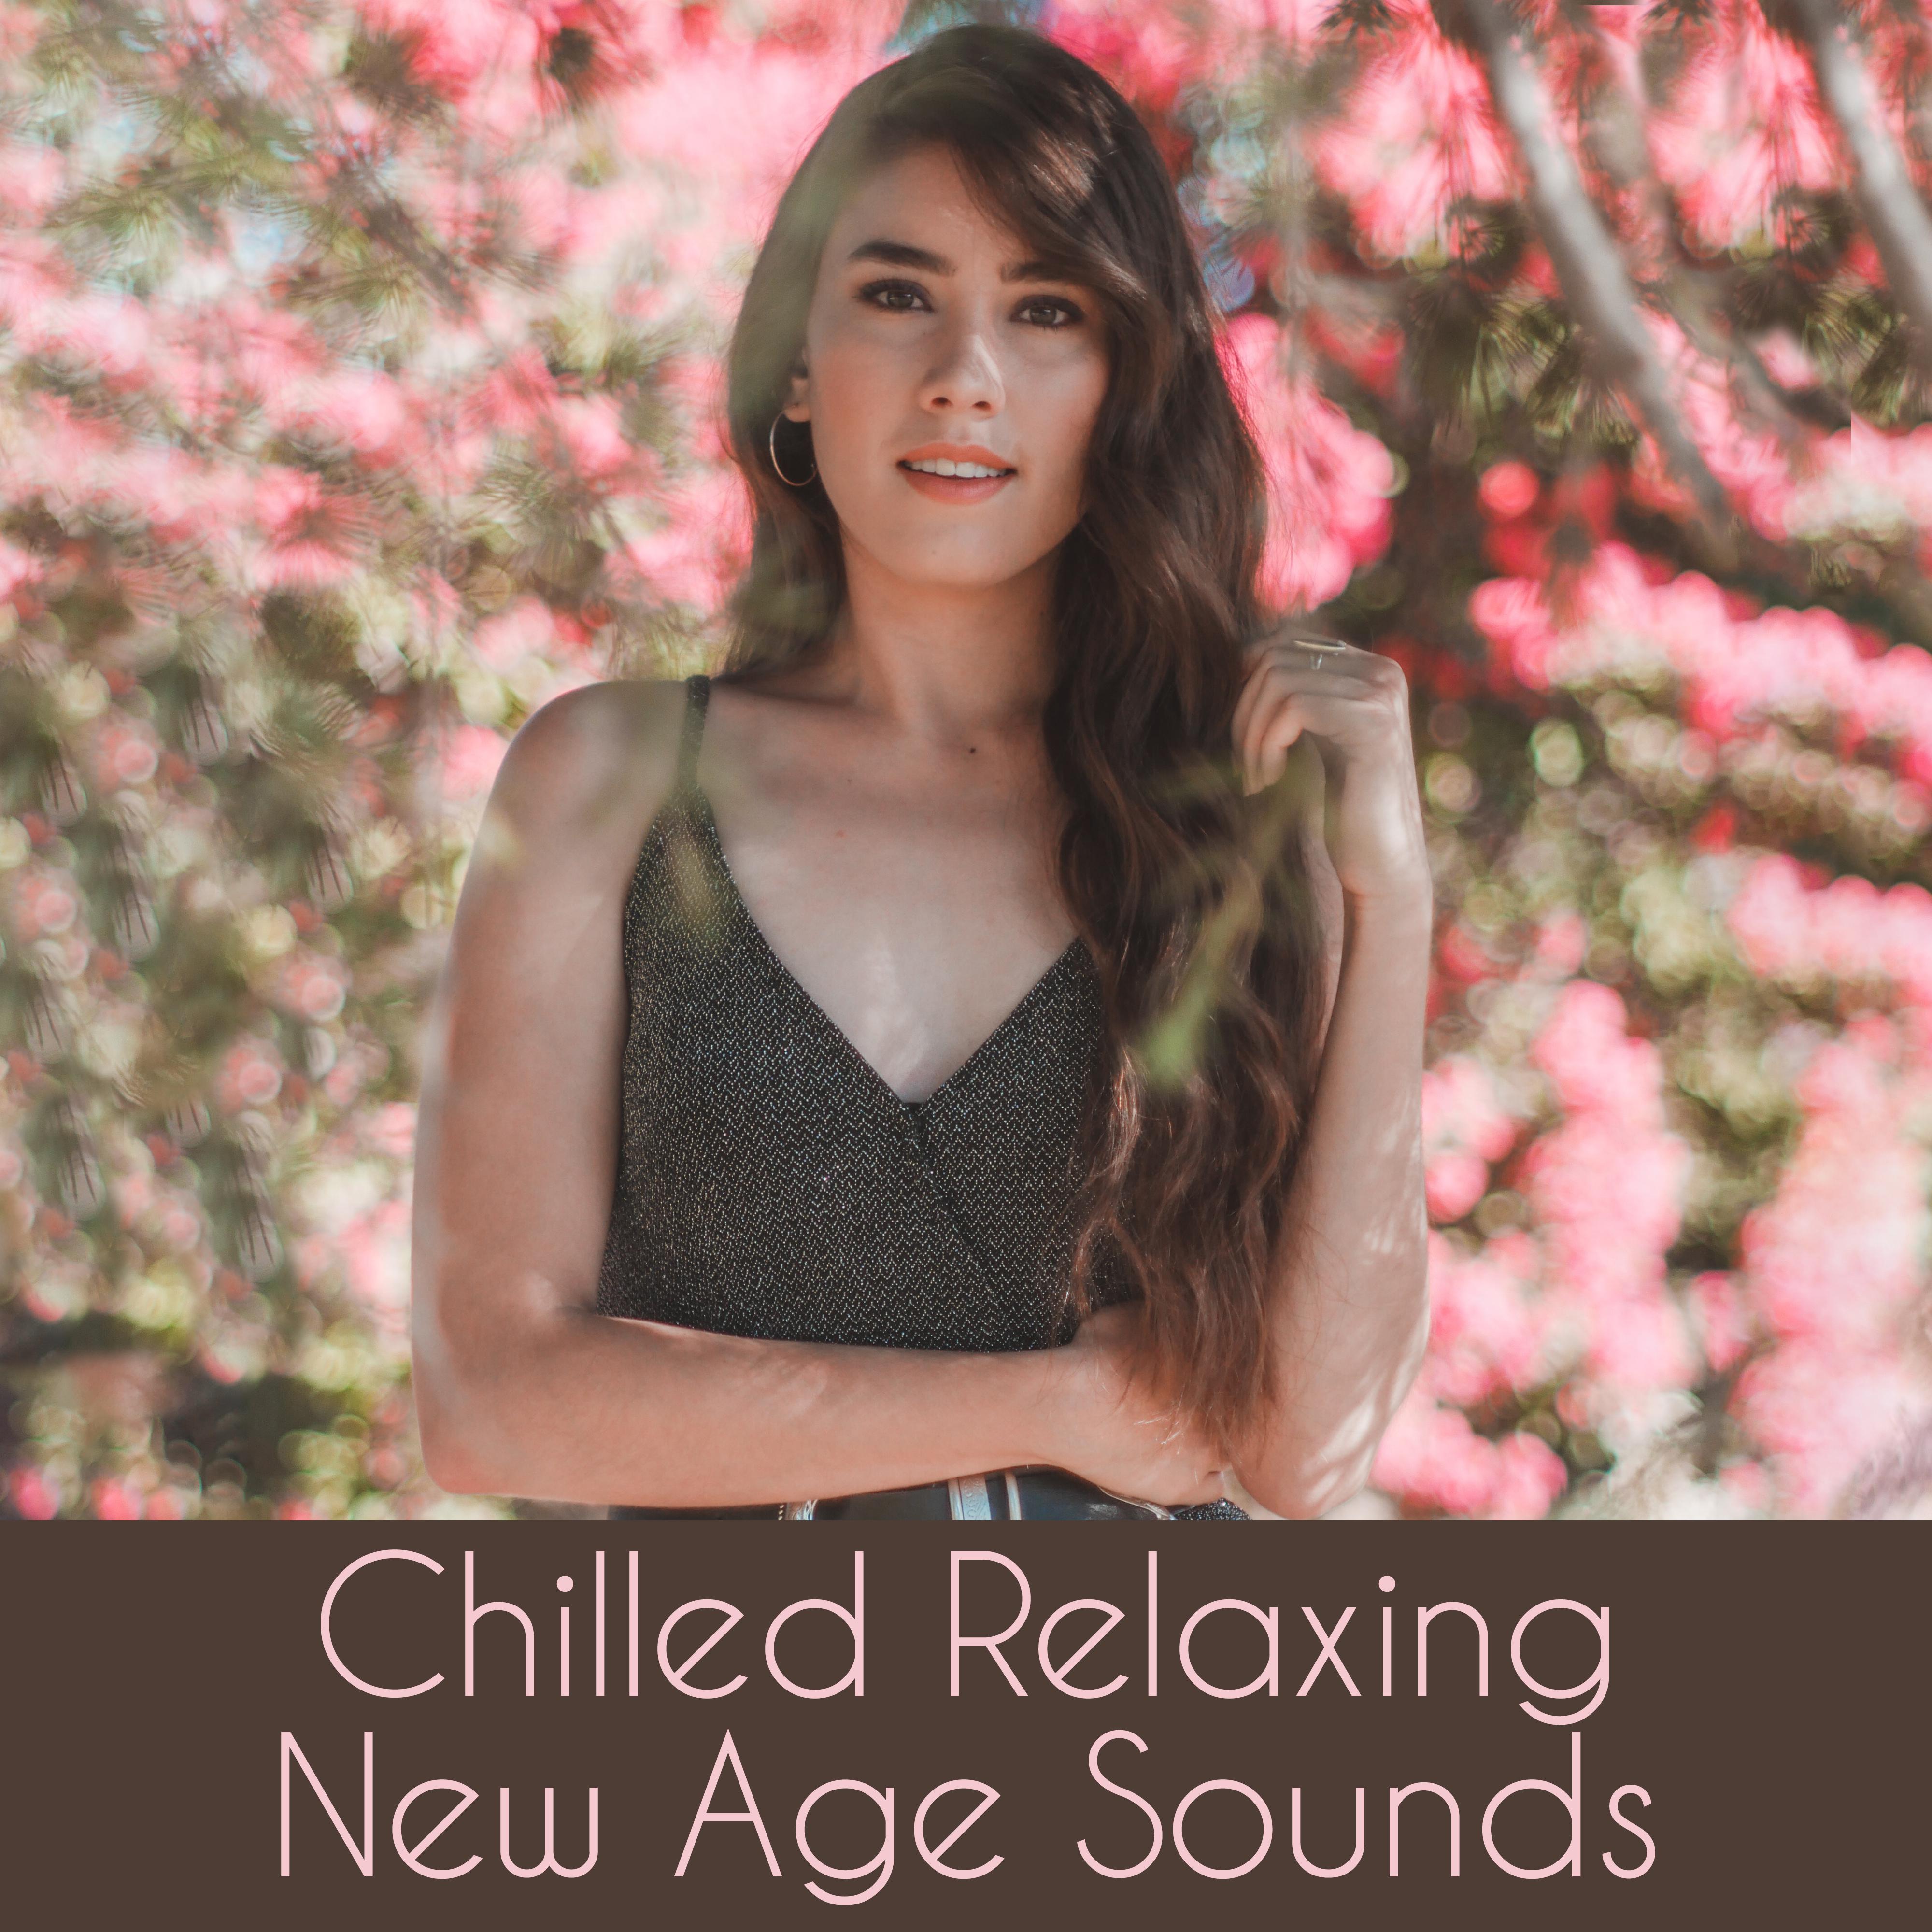 Chilled Relaxing New Age Sounds: 2019 Ambient New Age Music for Total Relaxation, Calming Down, Stress Relief, Inner Silence, Better Feeling After Tough Day